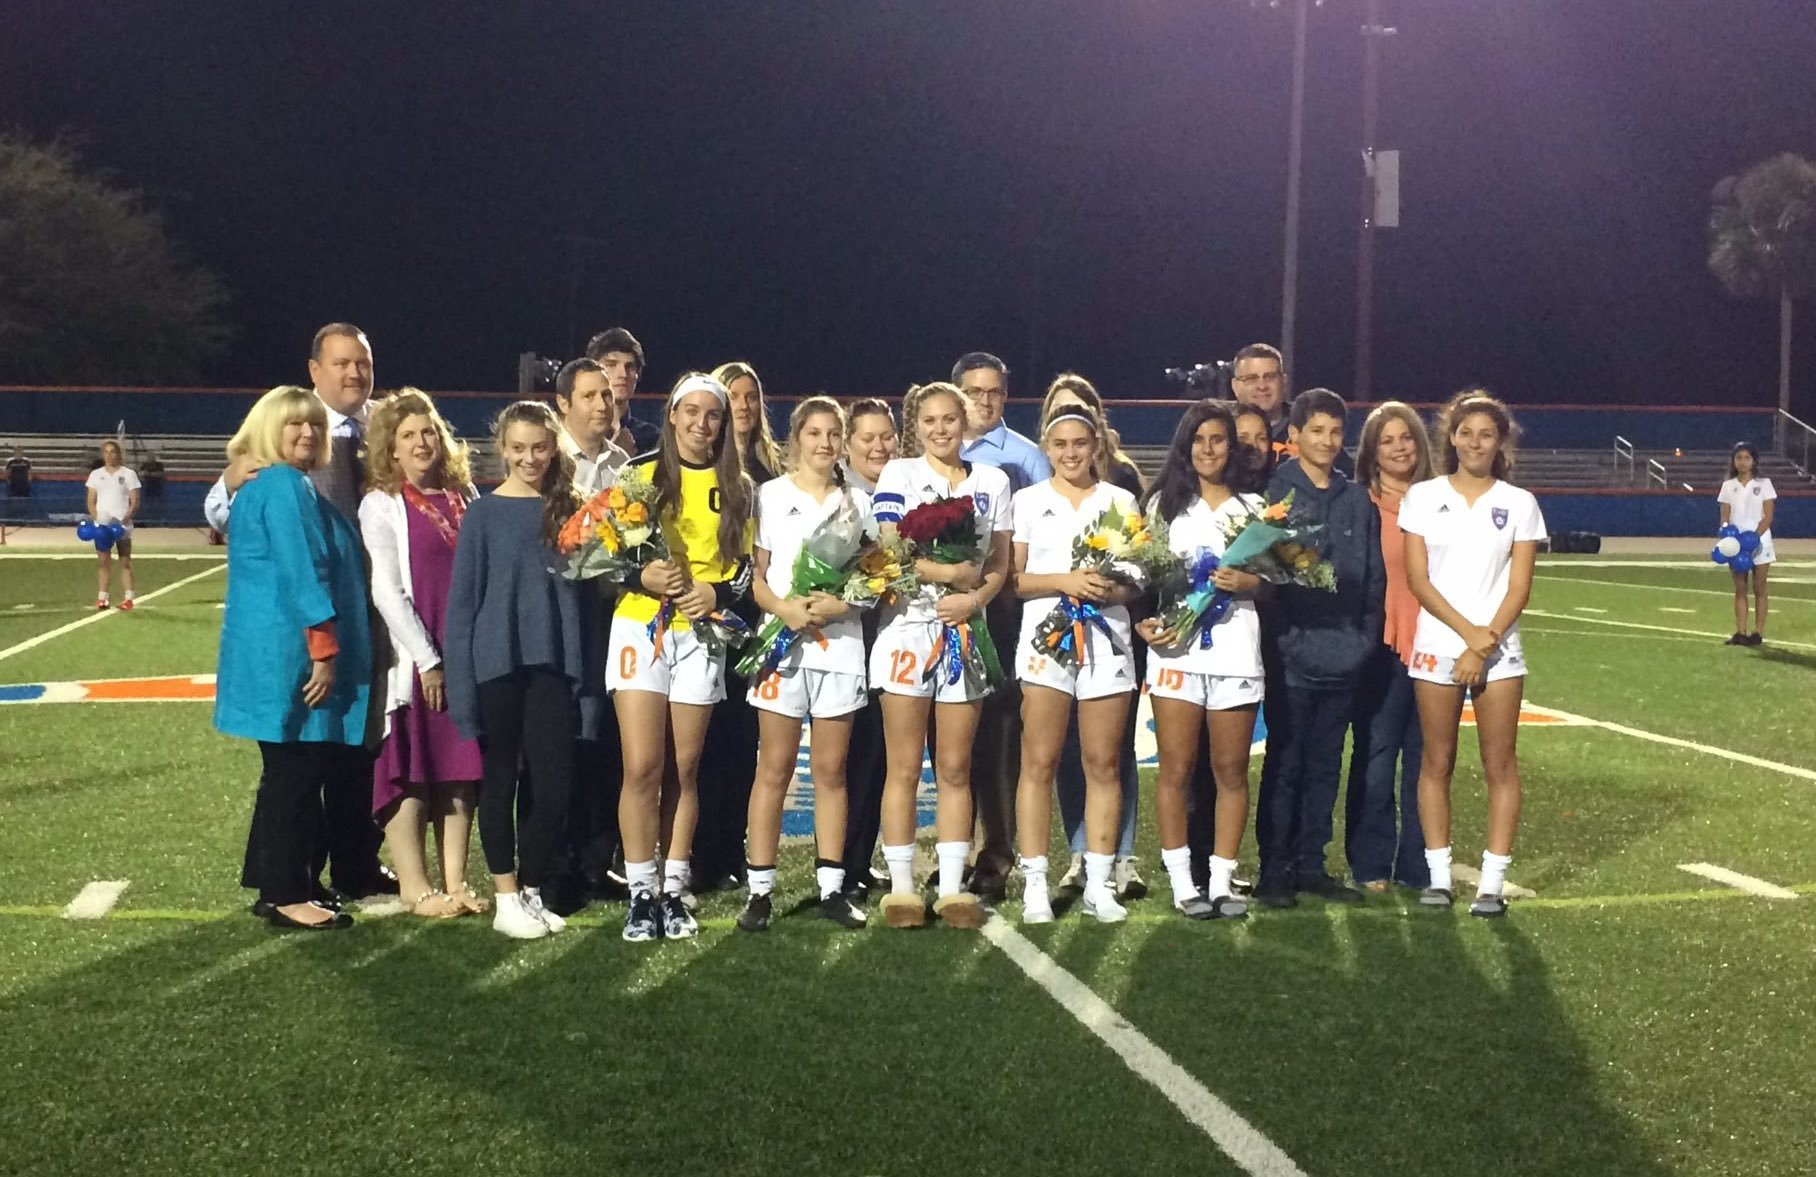 The Warrior seniors were recognized before game with their families.